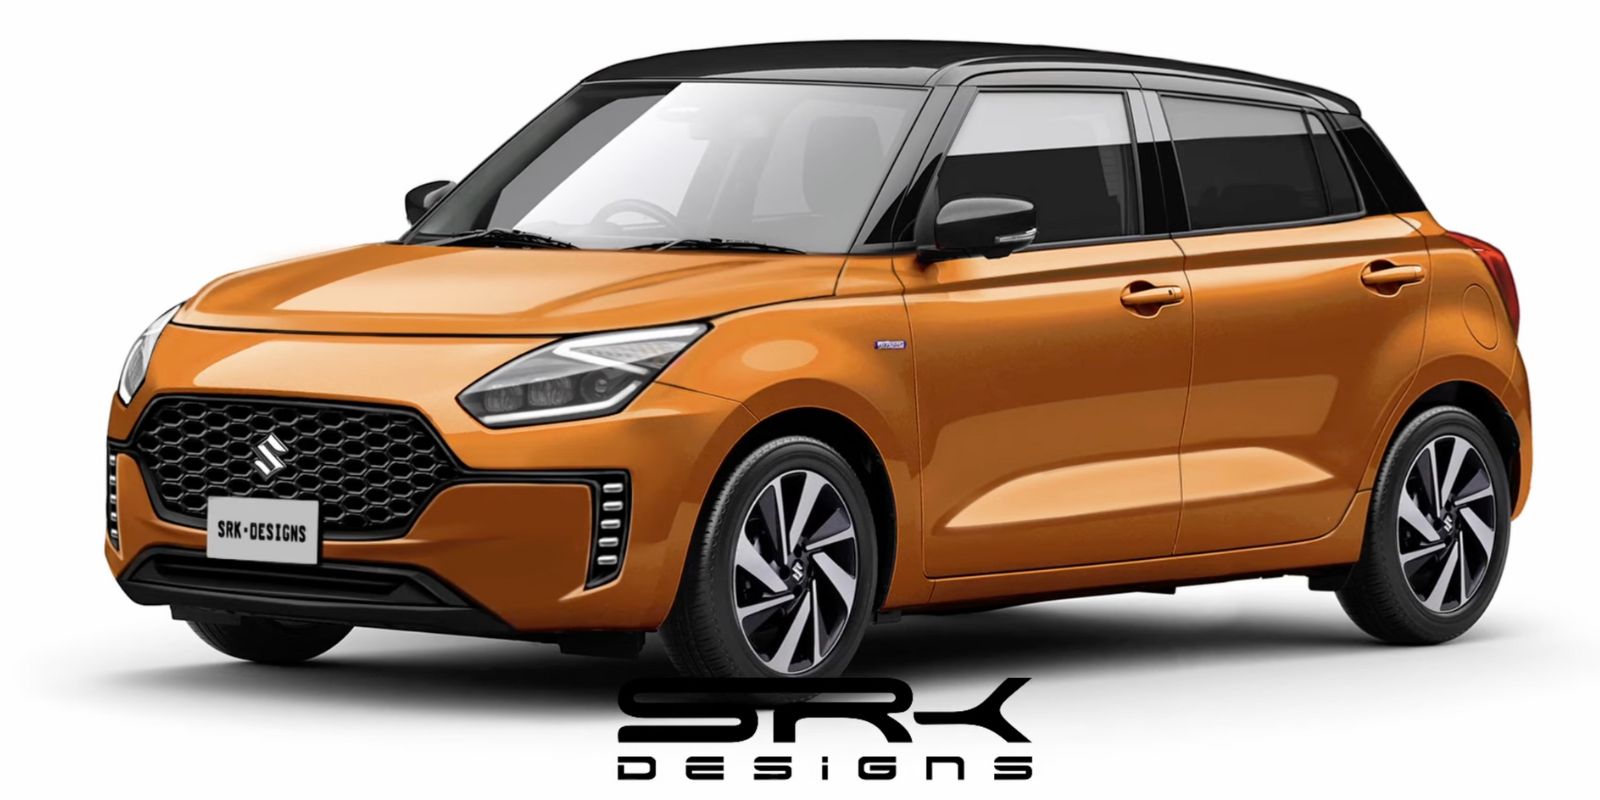 Maruti Suzuki Swift  Complete Overview of Features Pricing and Reviews